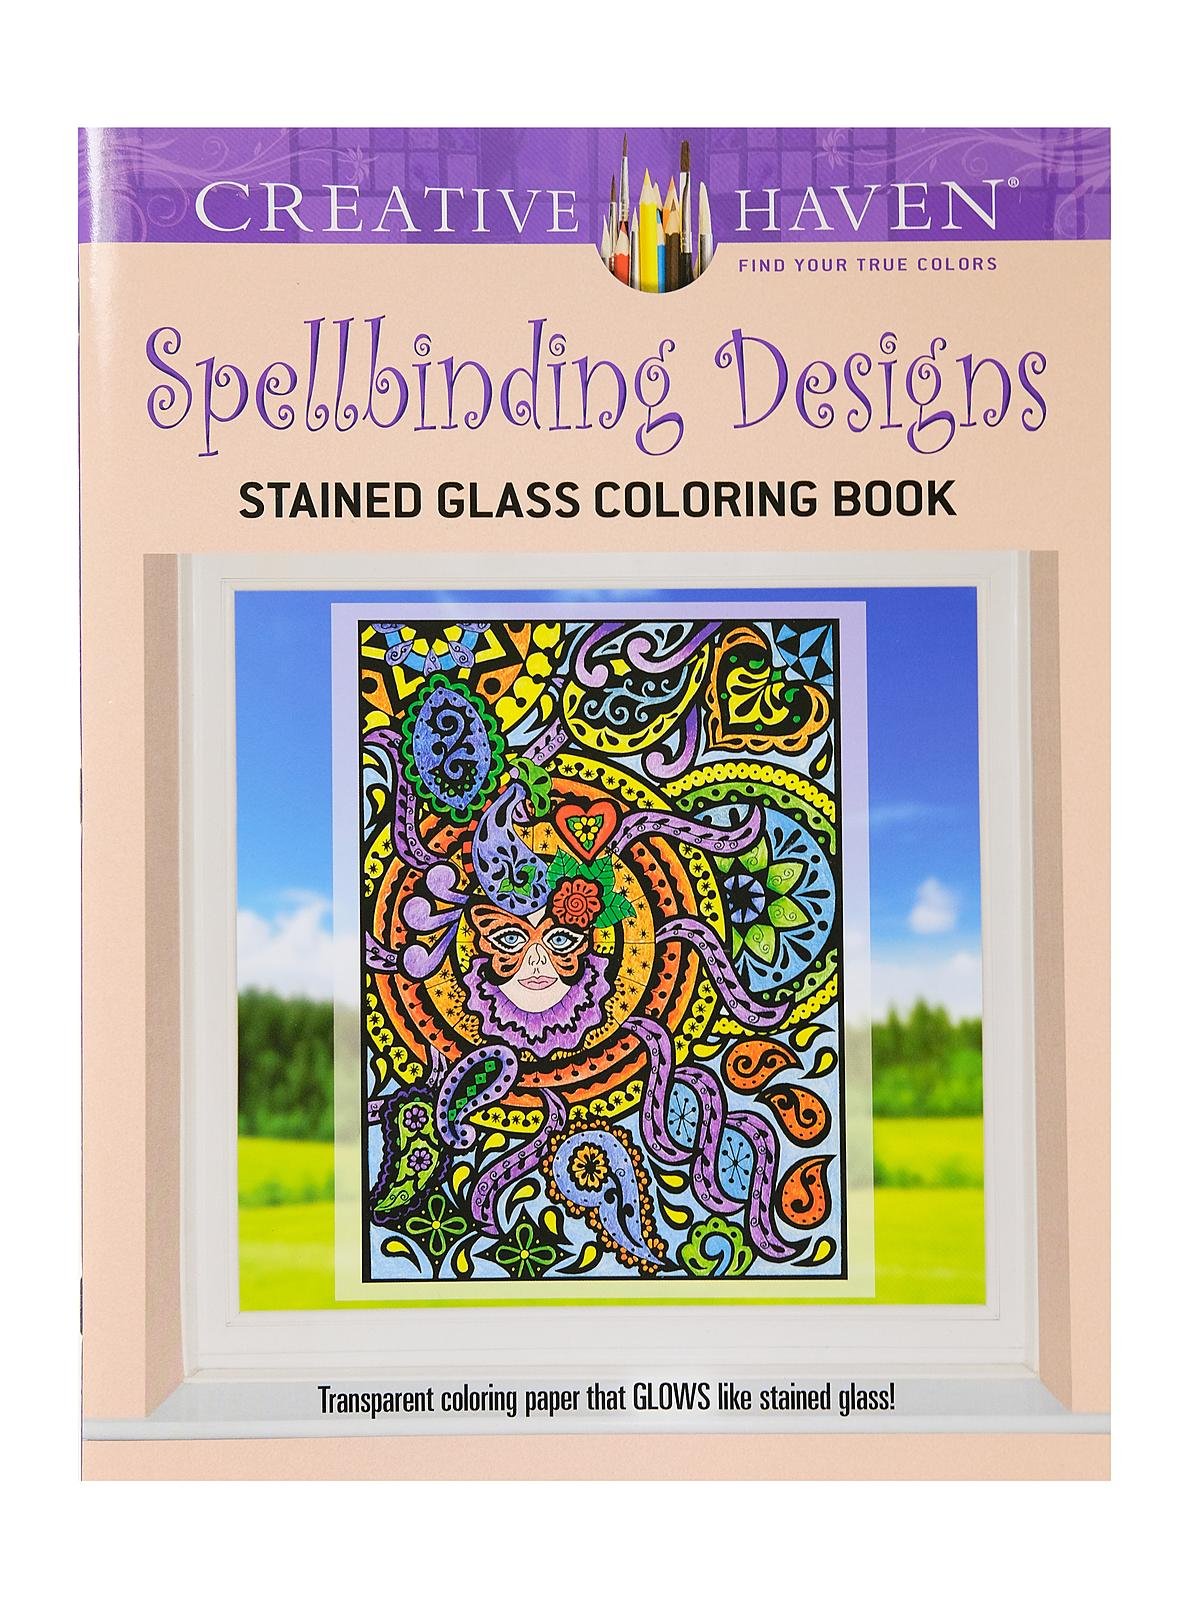 Spellbinding Designs Stained Glass